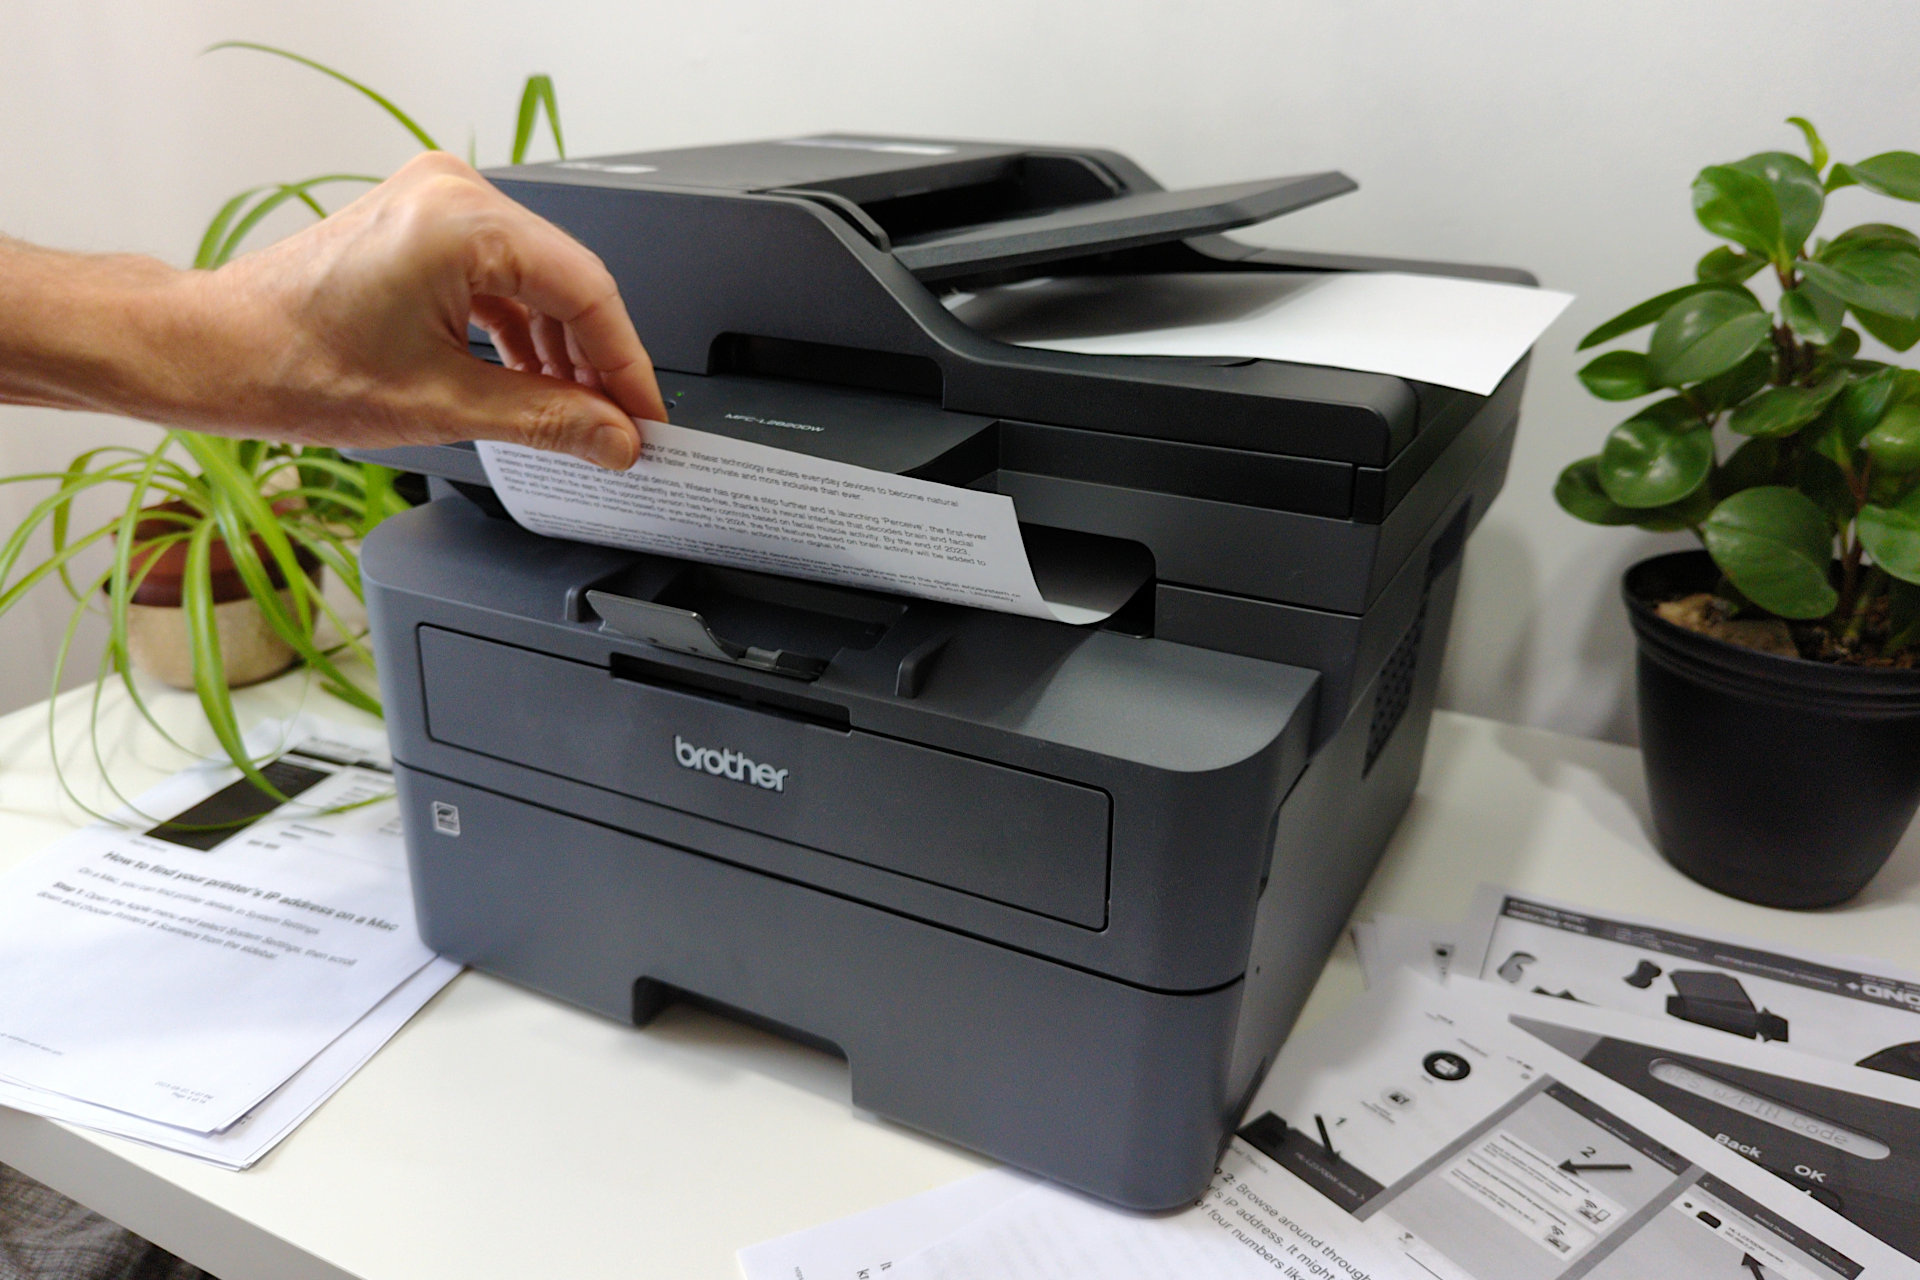 Copies are quick and easy with the MFC-L2820DWXL.